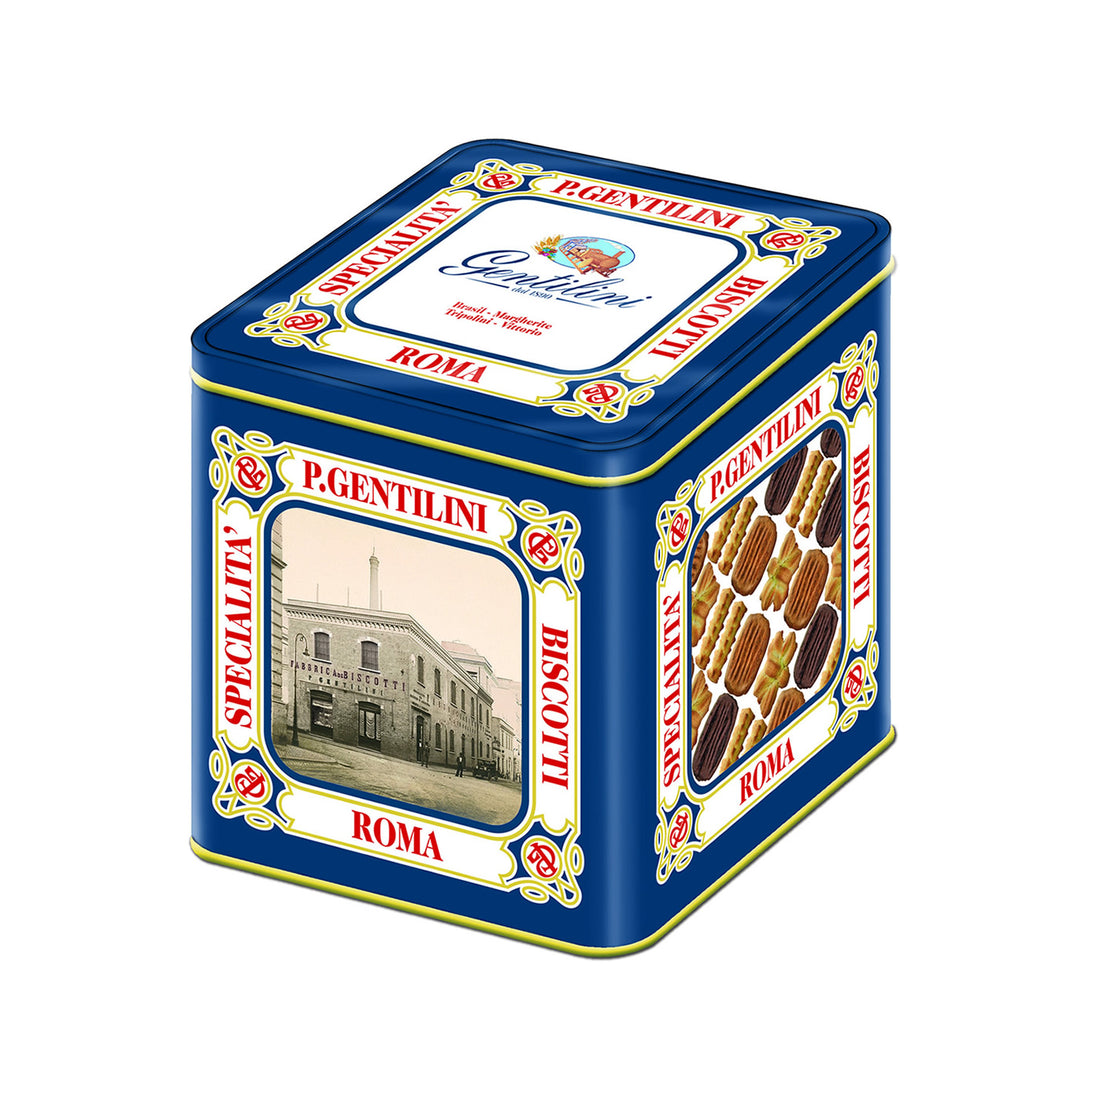 Riediting Biscuit Tin 1000g